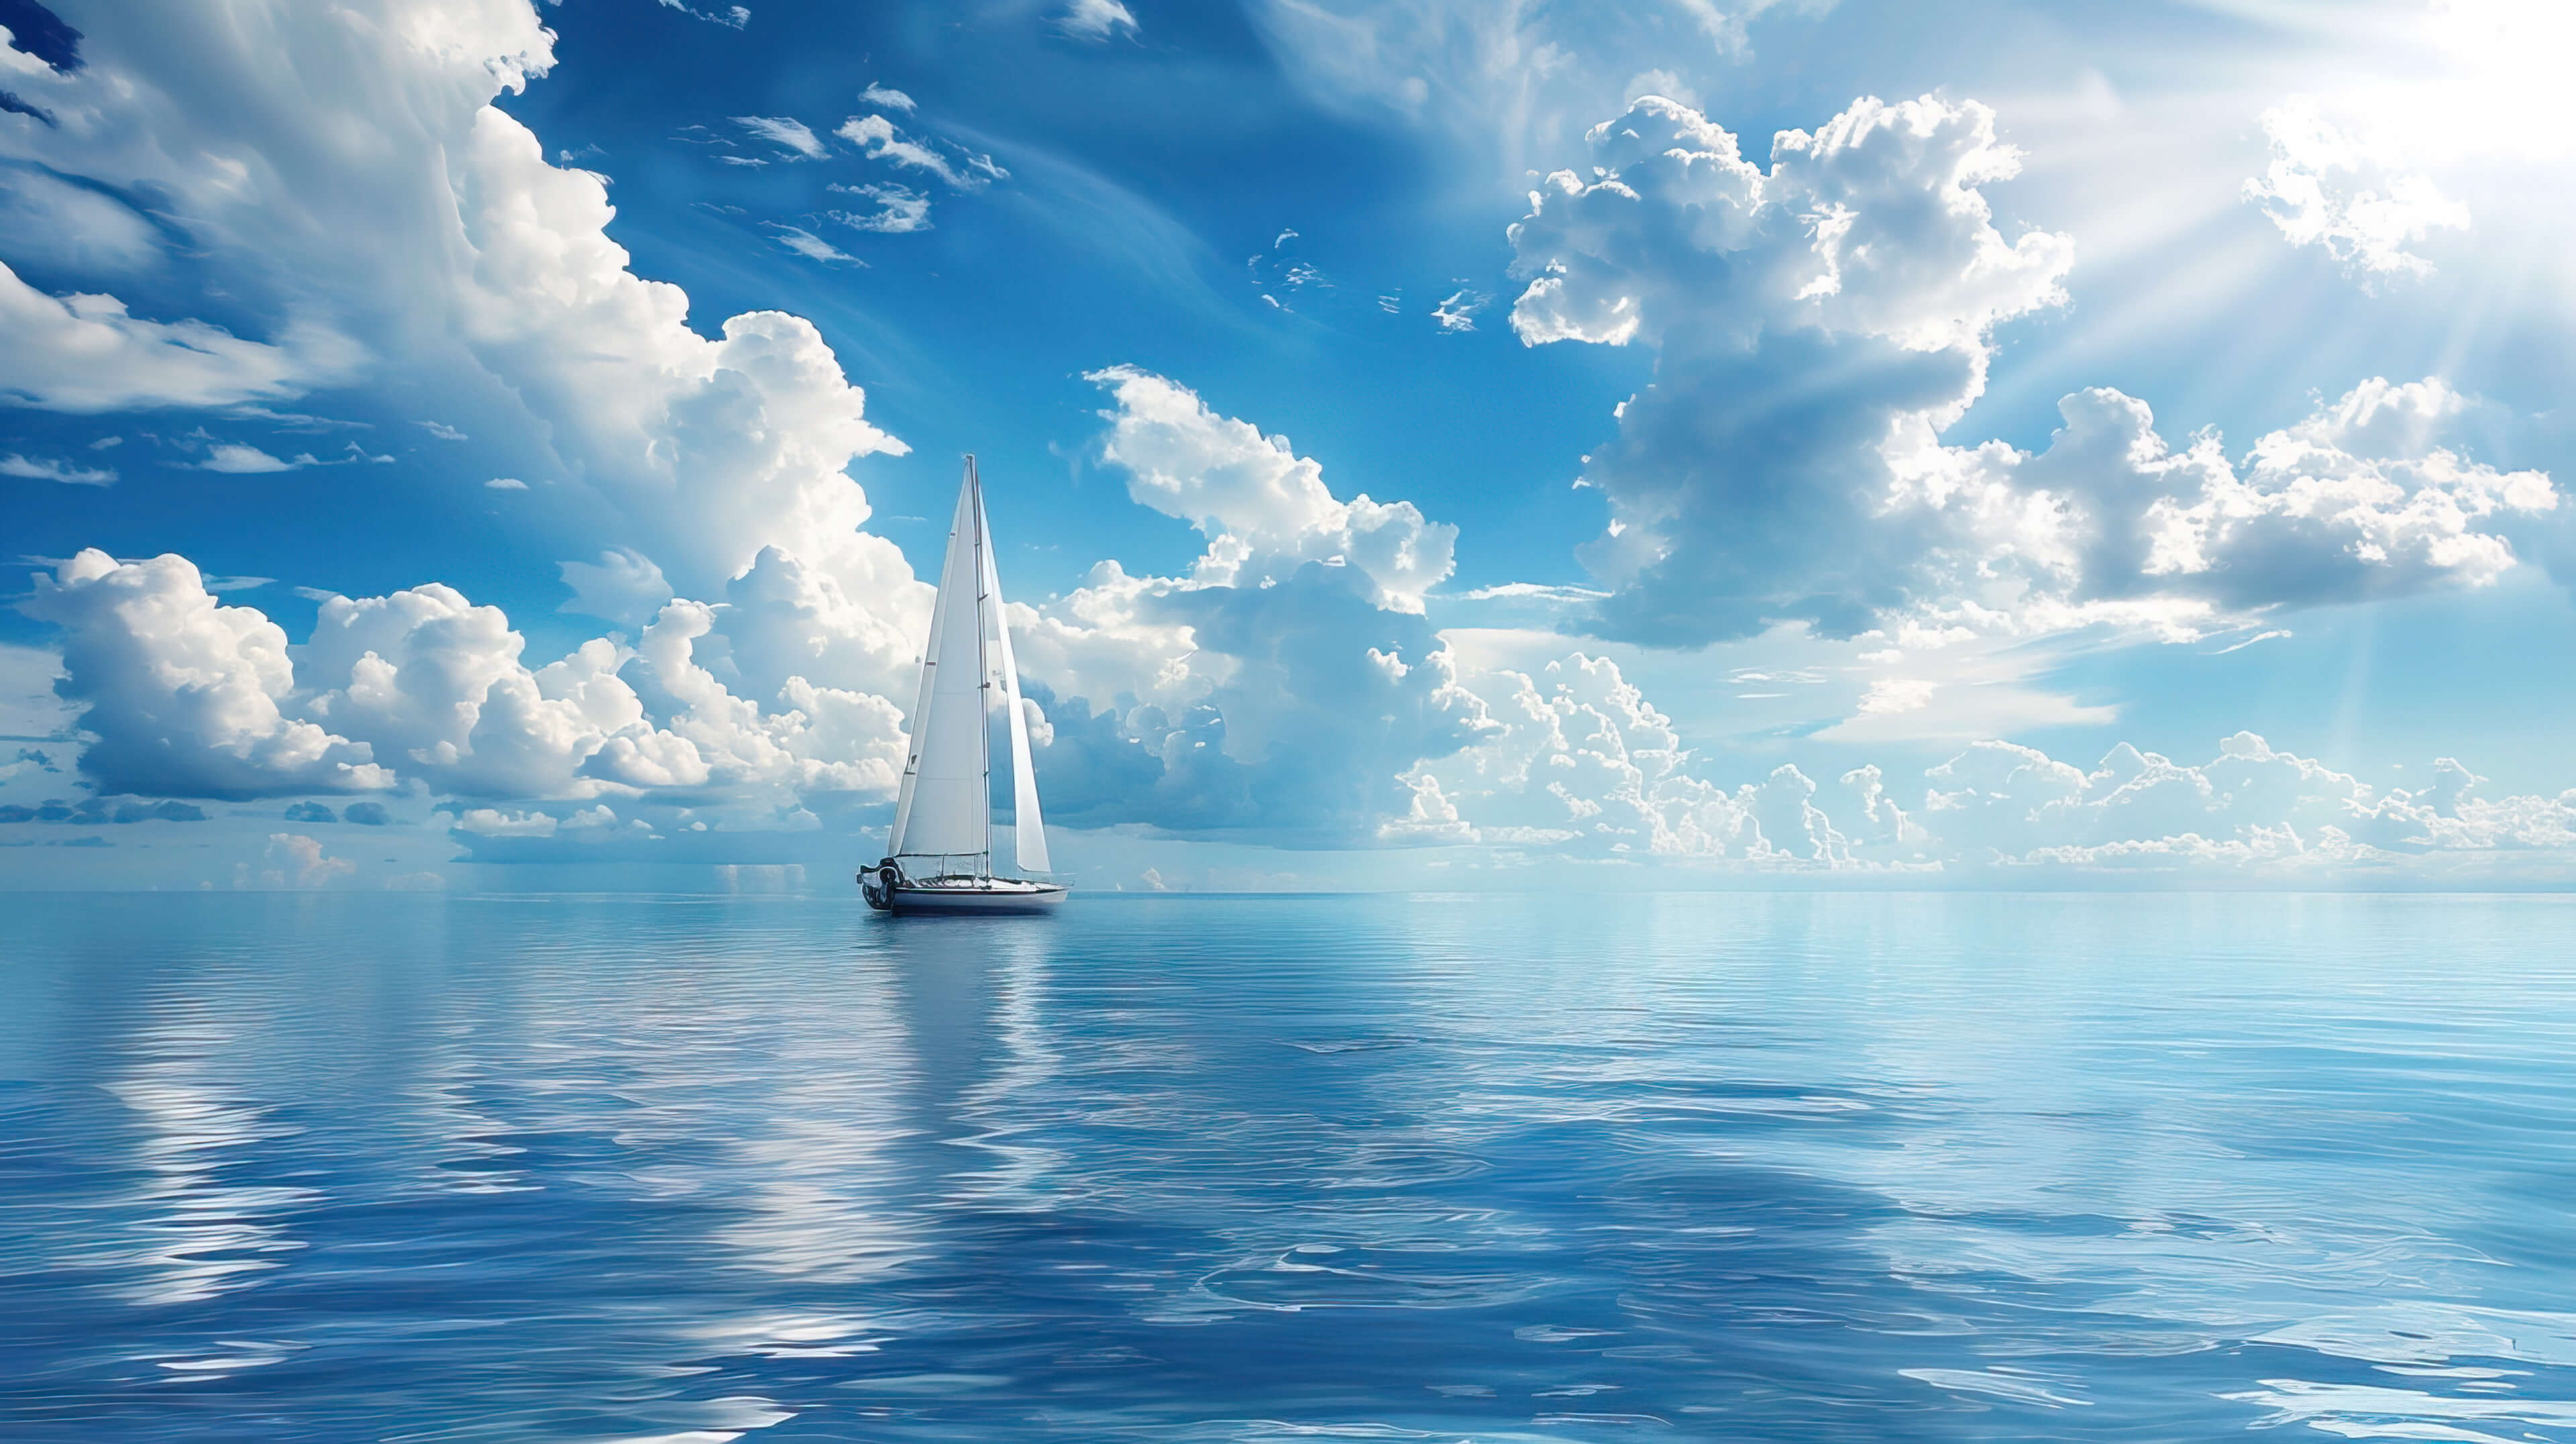 A tranquil wallpaper of a sailboat cruising peacefully on serene waters its white sails catching the gentle breeze under a backdrop of blue skies and fluffy clouds